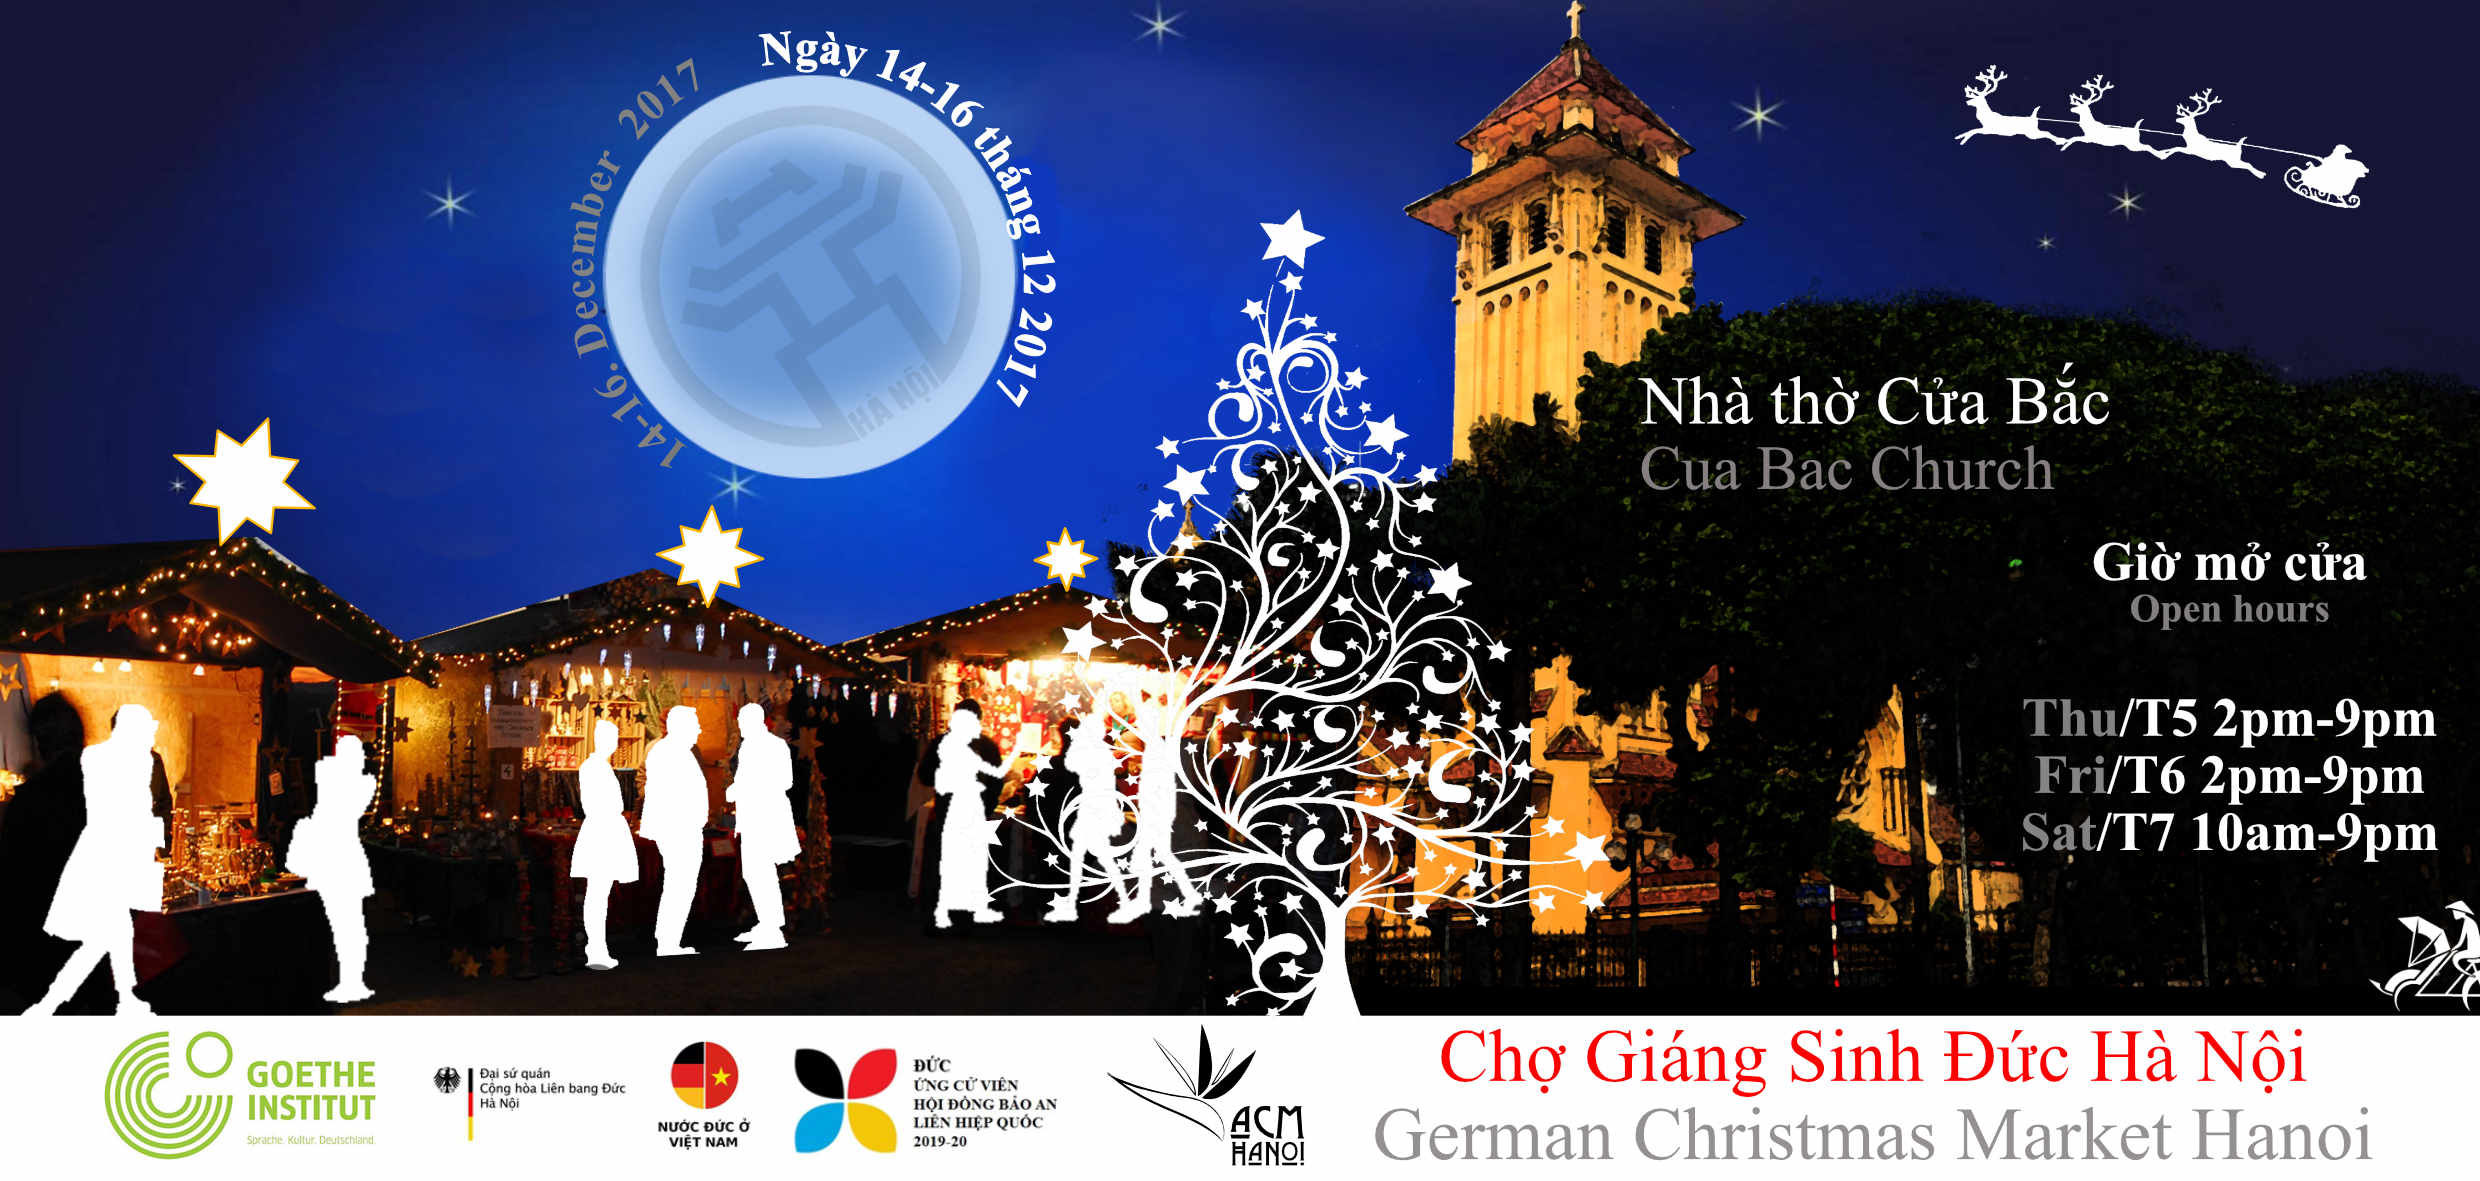 Concert, German-style market to ring in Christmas in Hanoi